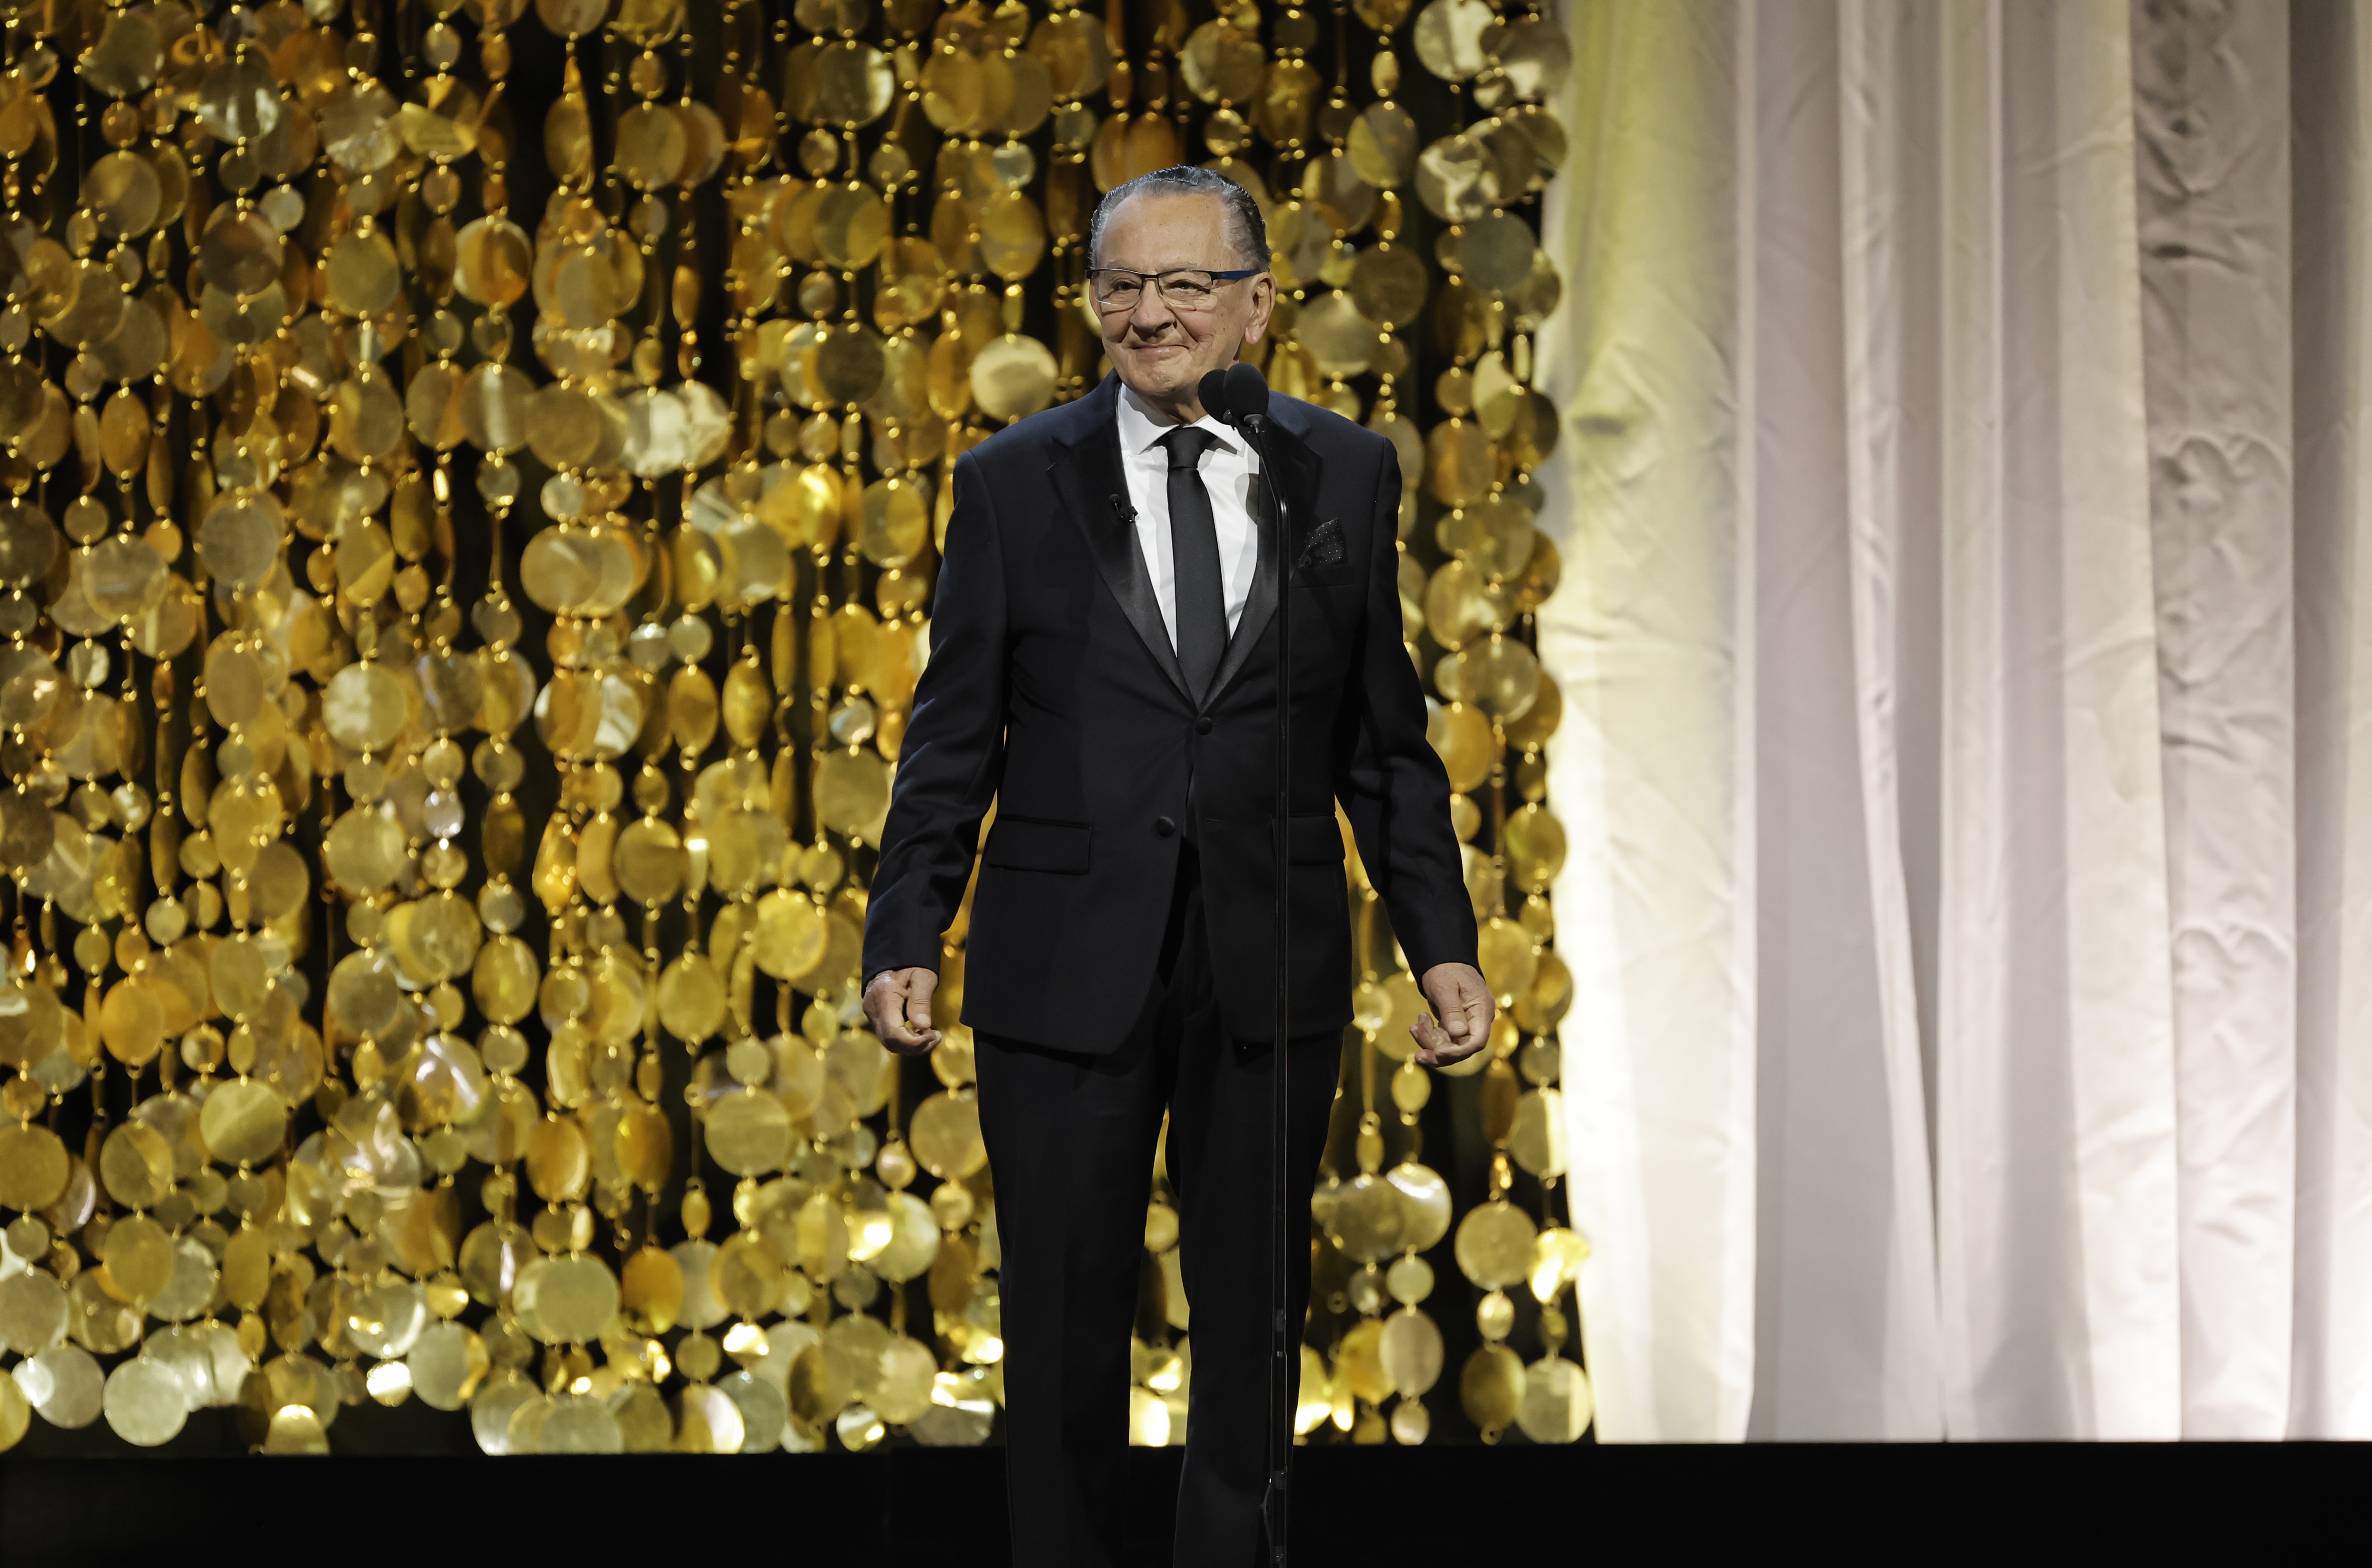 Frank Caprio speaking at the Creative Arts & Lifestyle Emmys in Pasadena, California on June 18, 2022 | Source: Getty Images